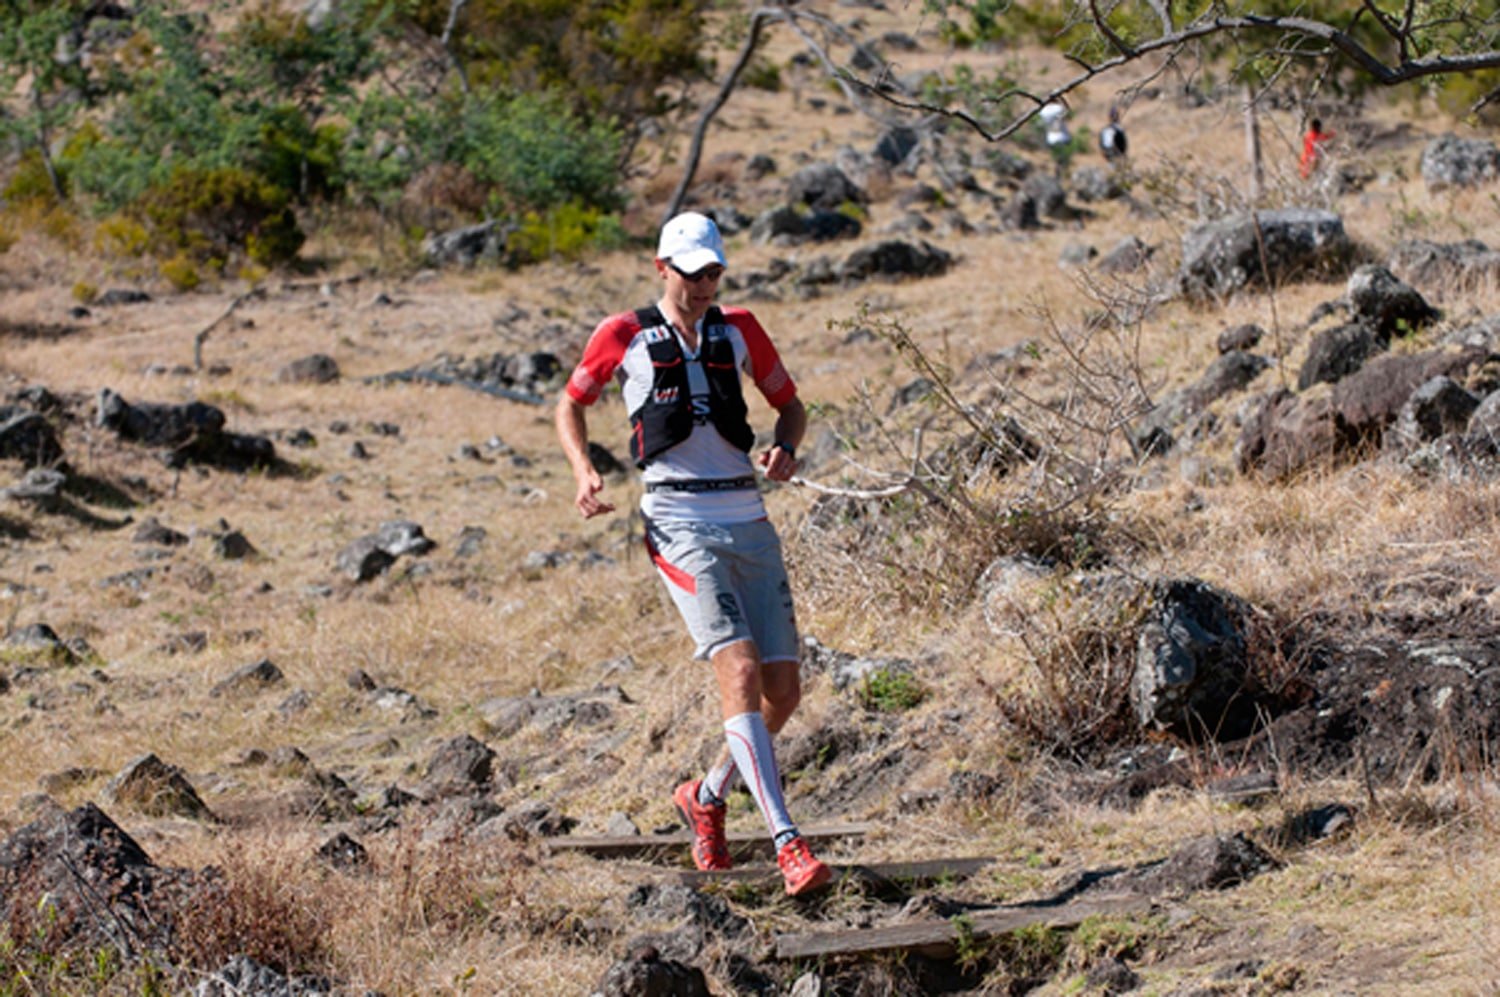 ARTICLE-The grand raid on Reunion Island concludes the 2014 Ultra Trail World Tour